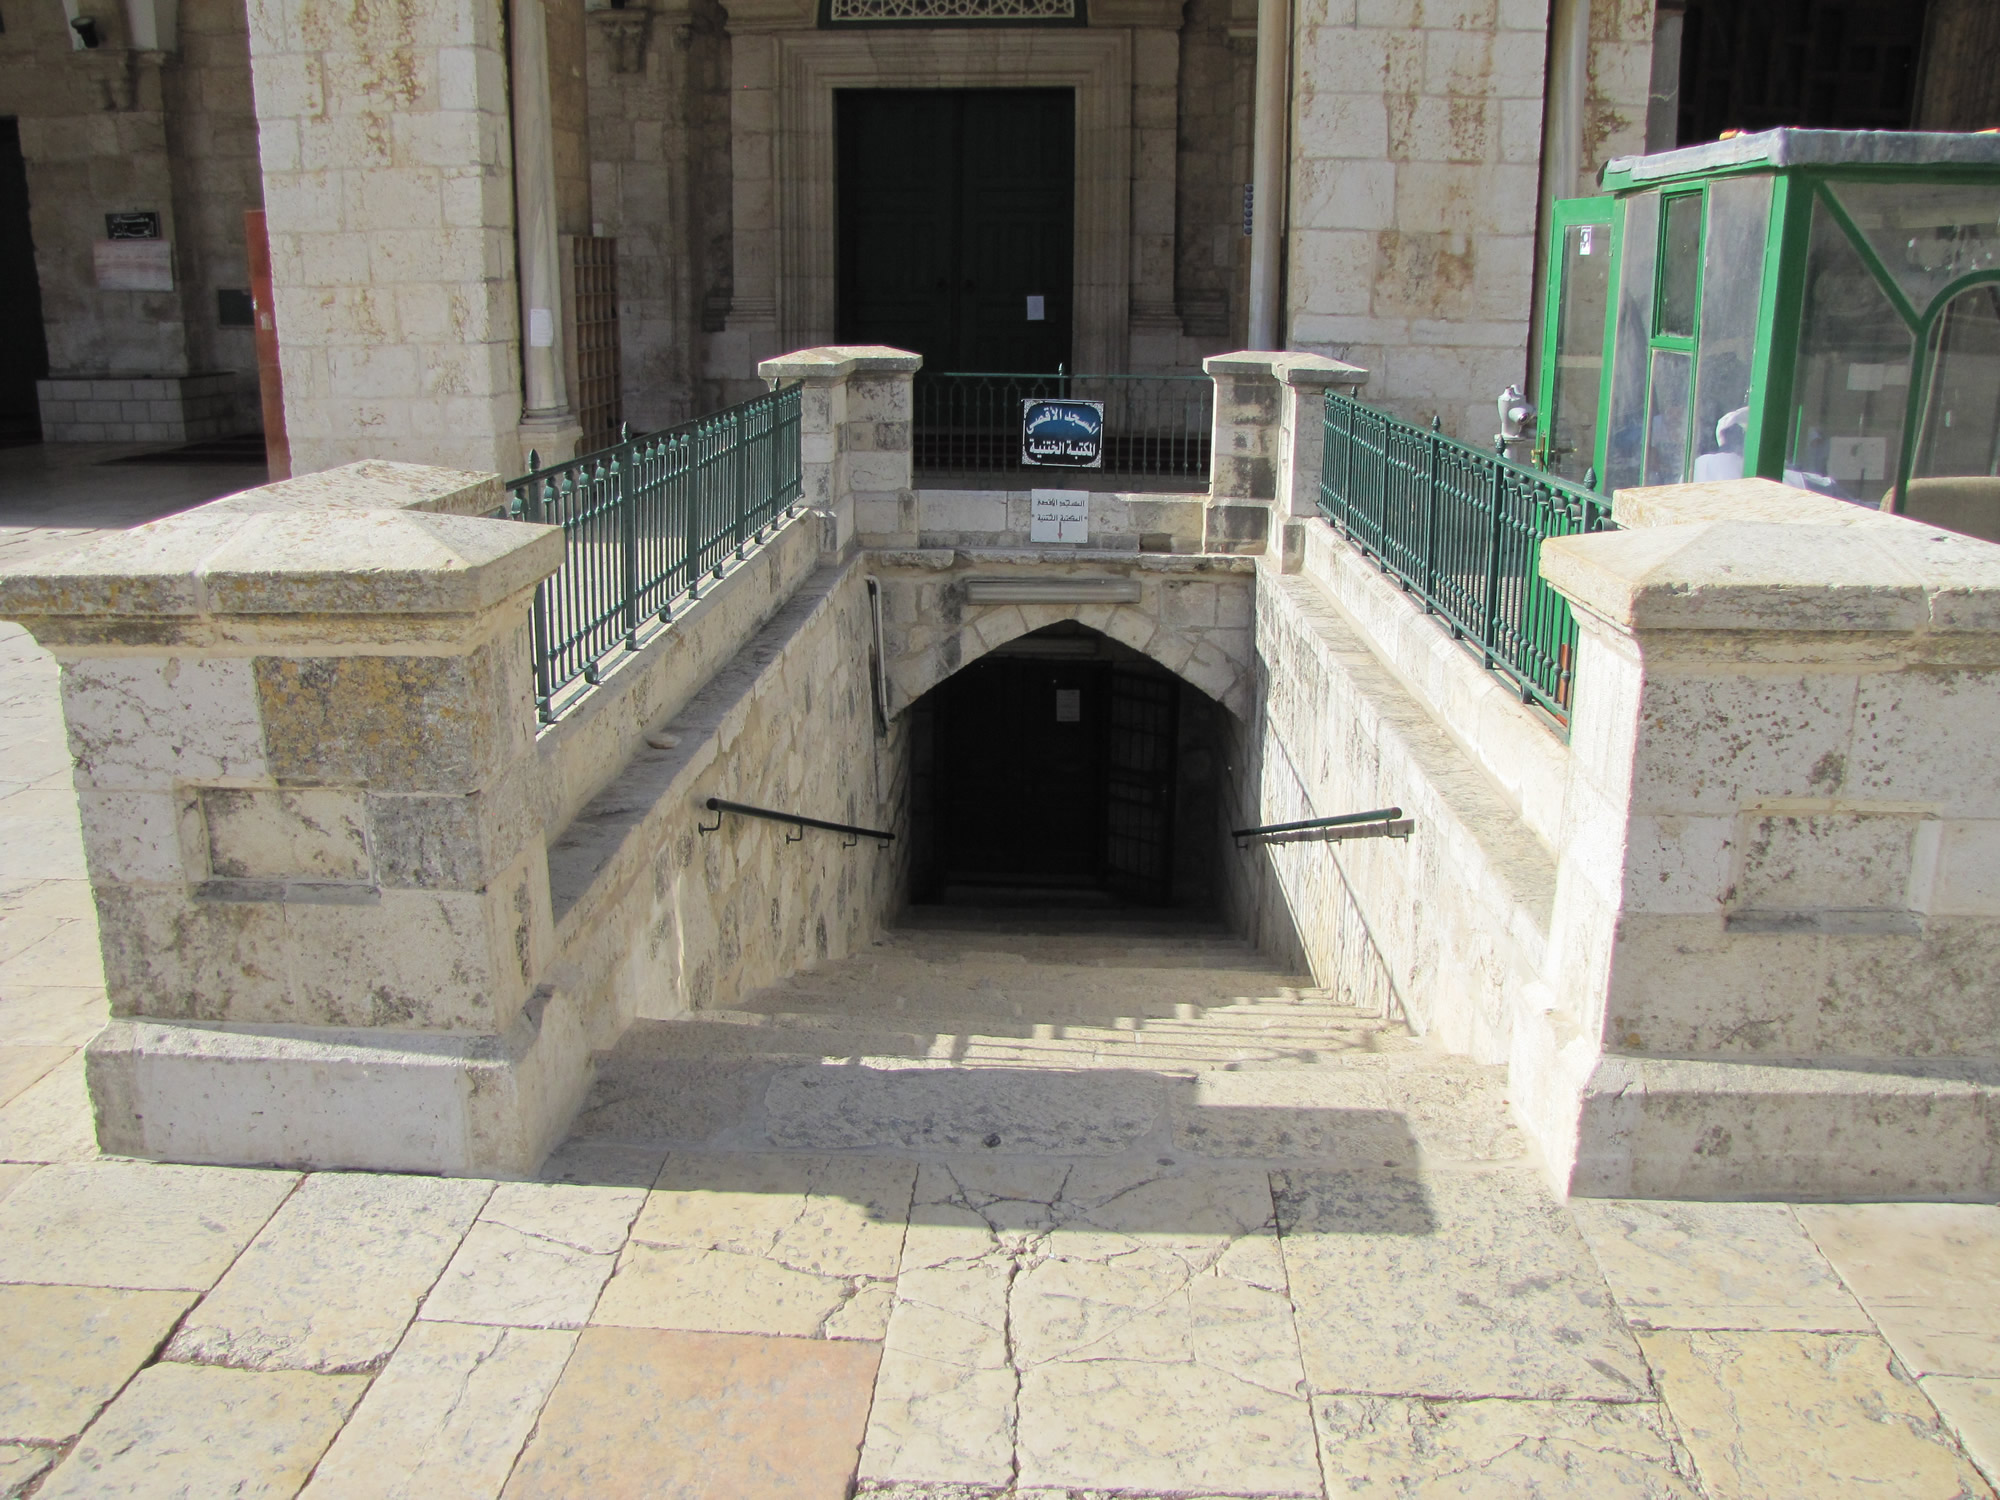 Al Aqsa Mosque stairs leading down to the New Testament period Double Gate entrance from the south